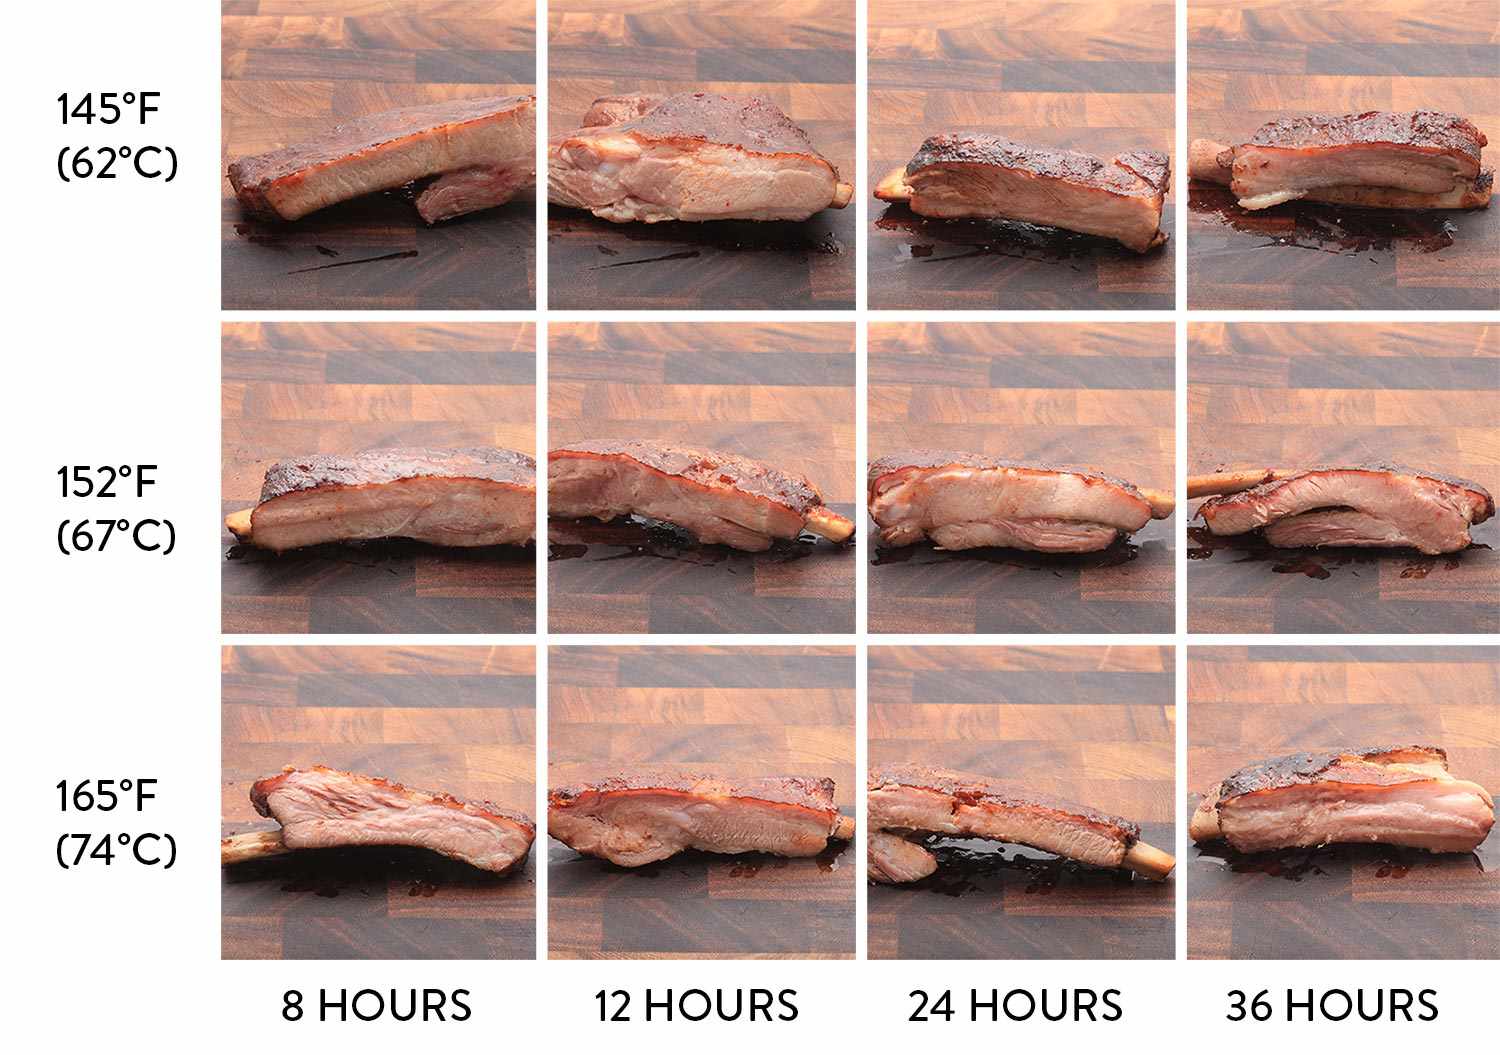 Chart showing pork ribs that have been cooked sous vide for various lengths of time at various temperatures